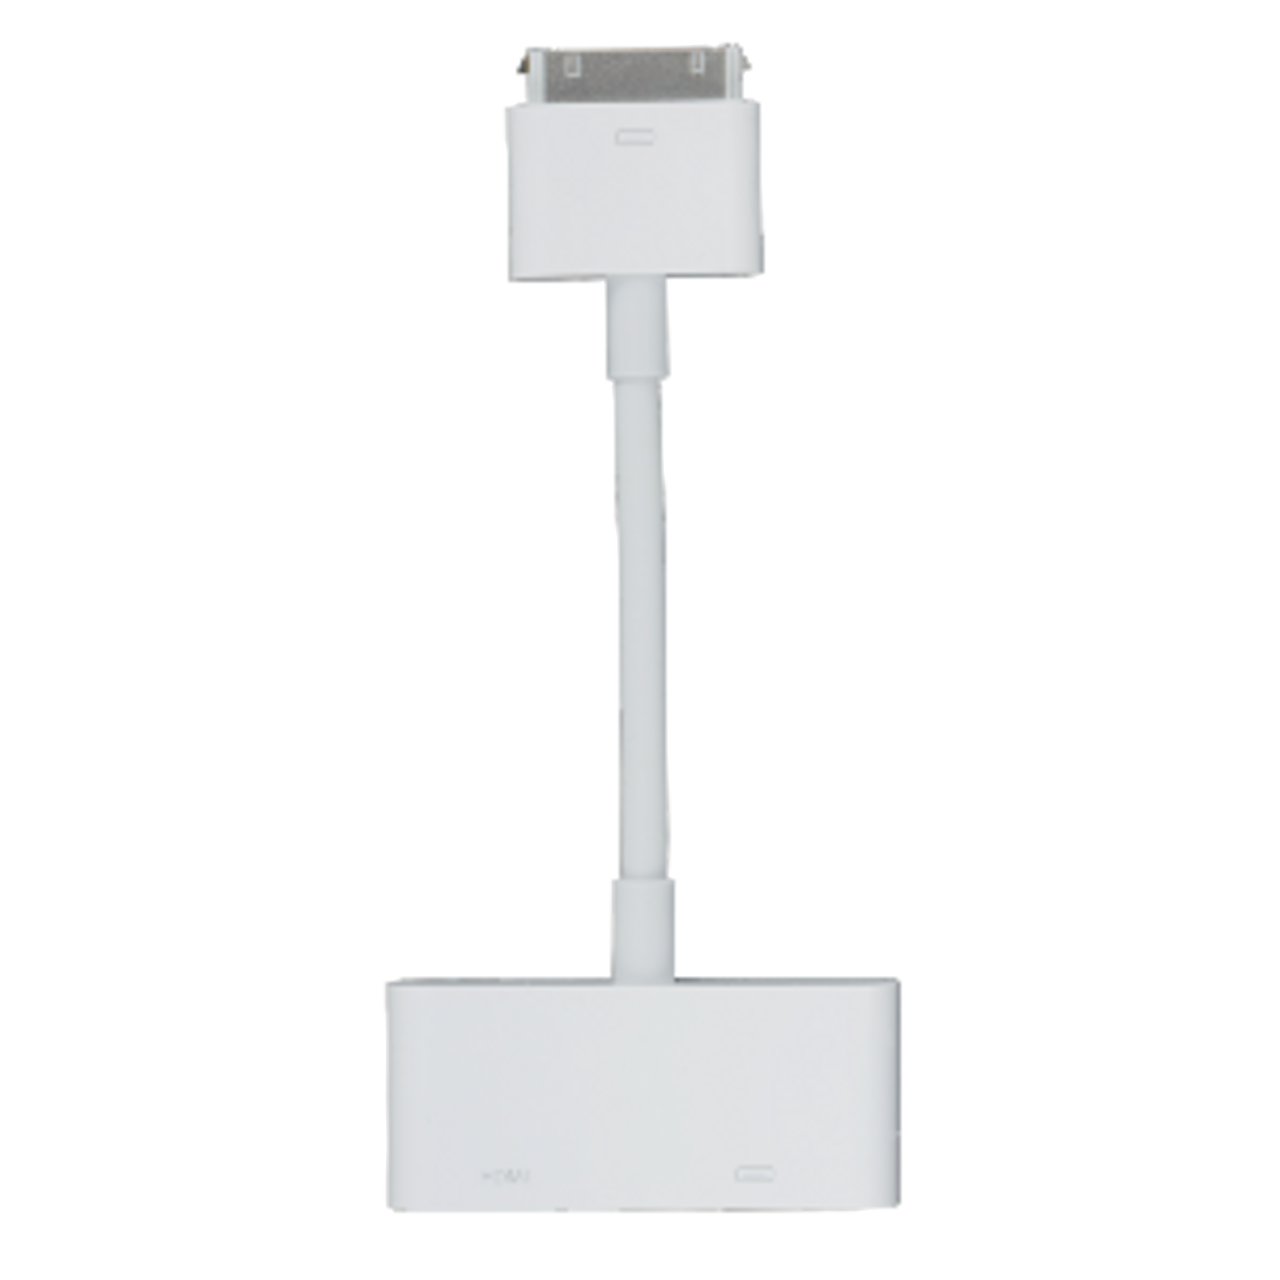 1080P HDMI HDTV Cable for Lightning Digital AV Adapter for iphone 11 12 13  8 Pin USB to HDMI Cable for ipad Mini Air Pro